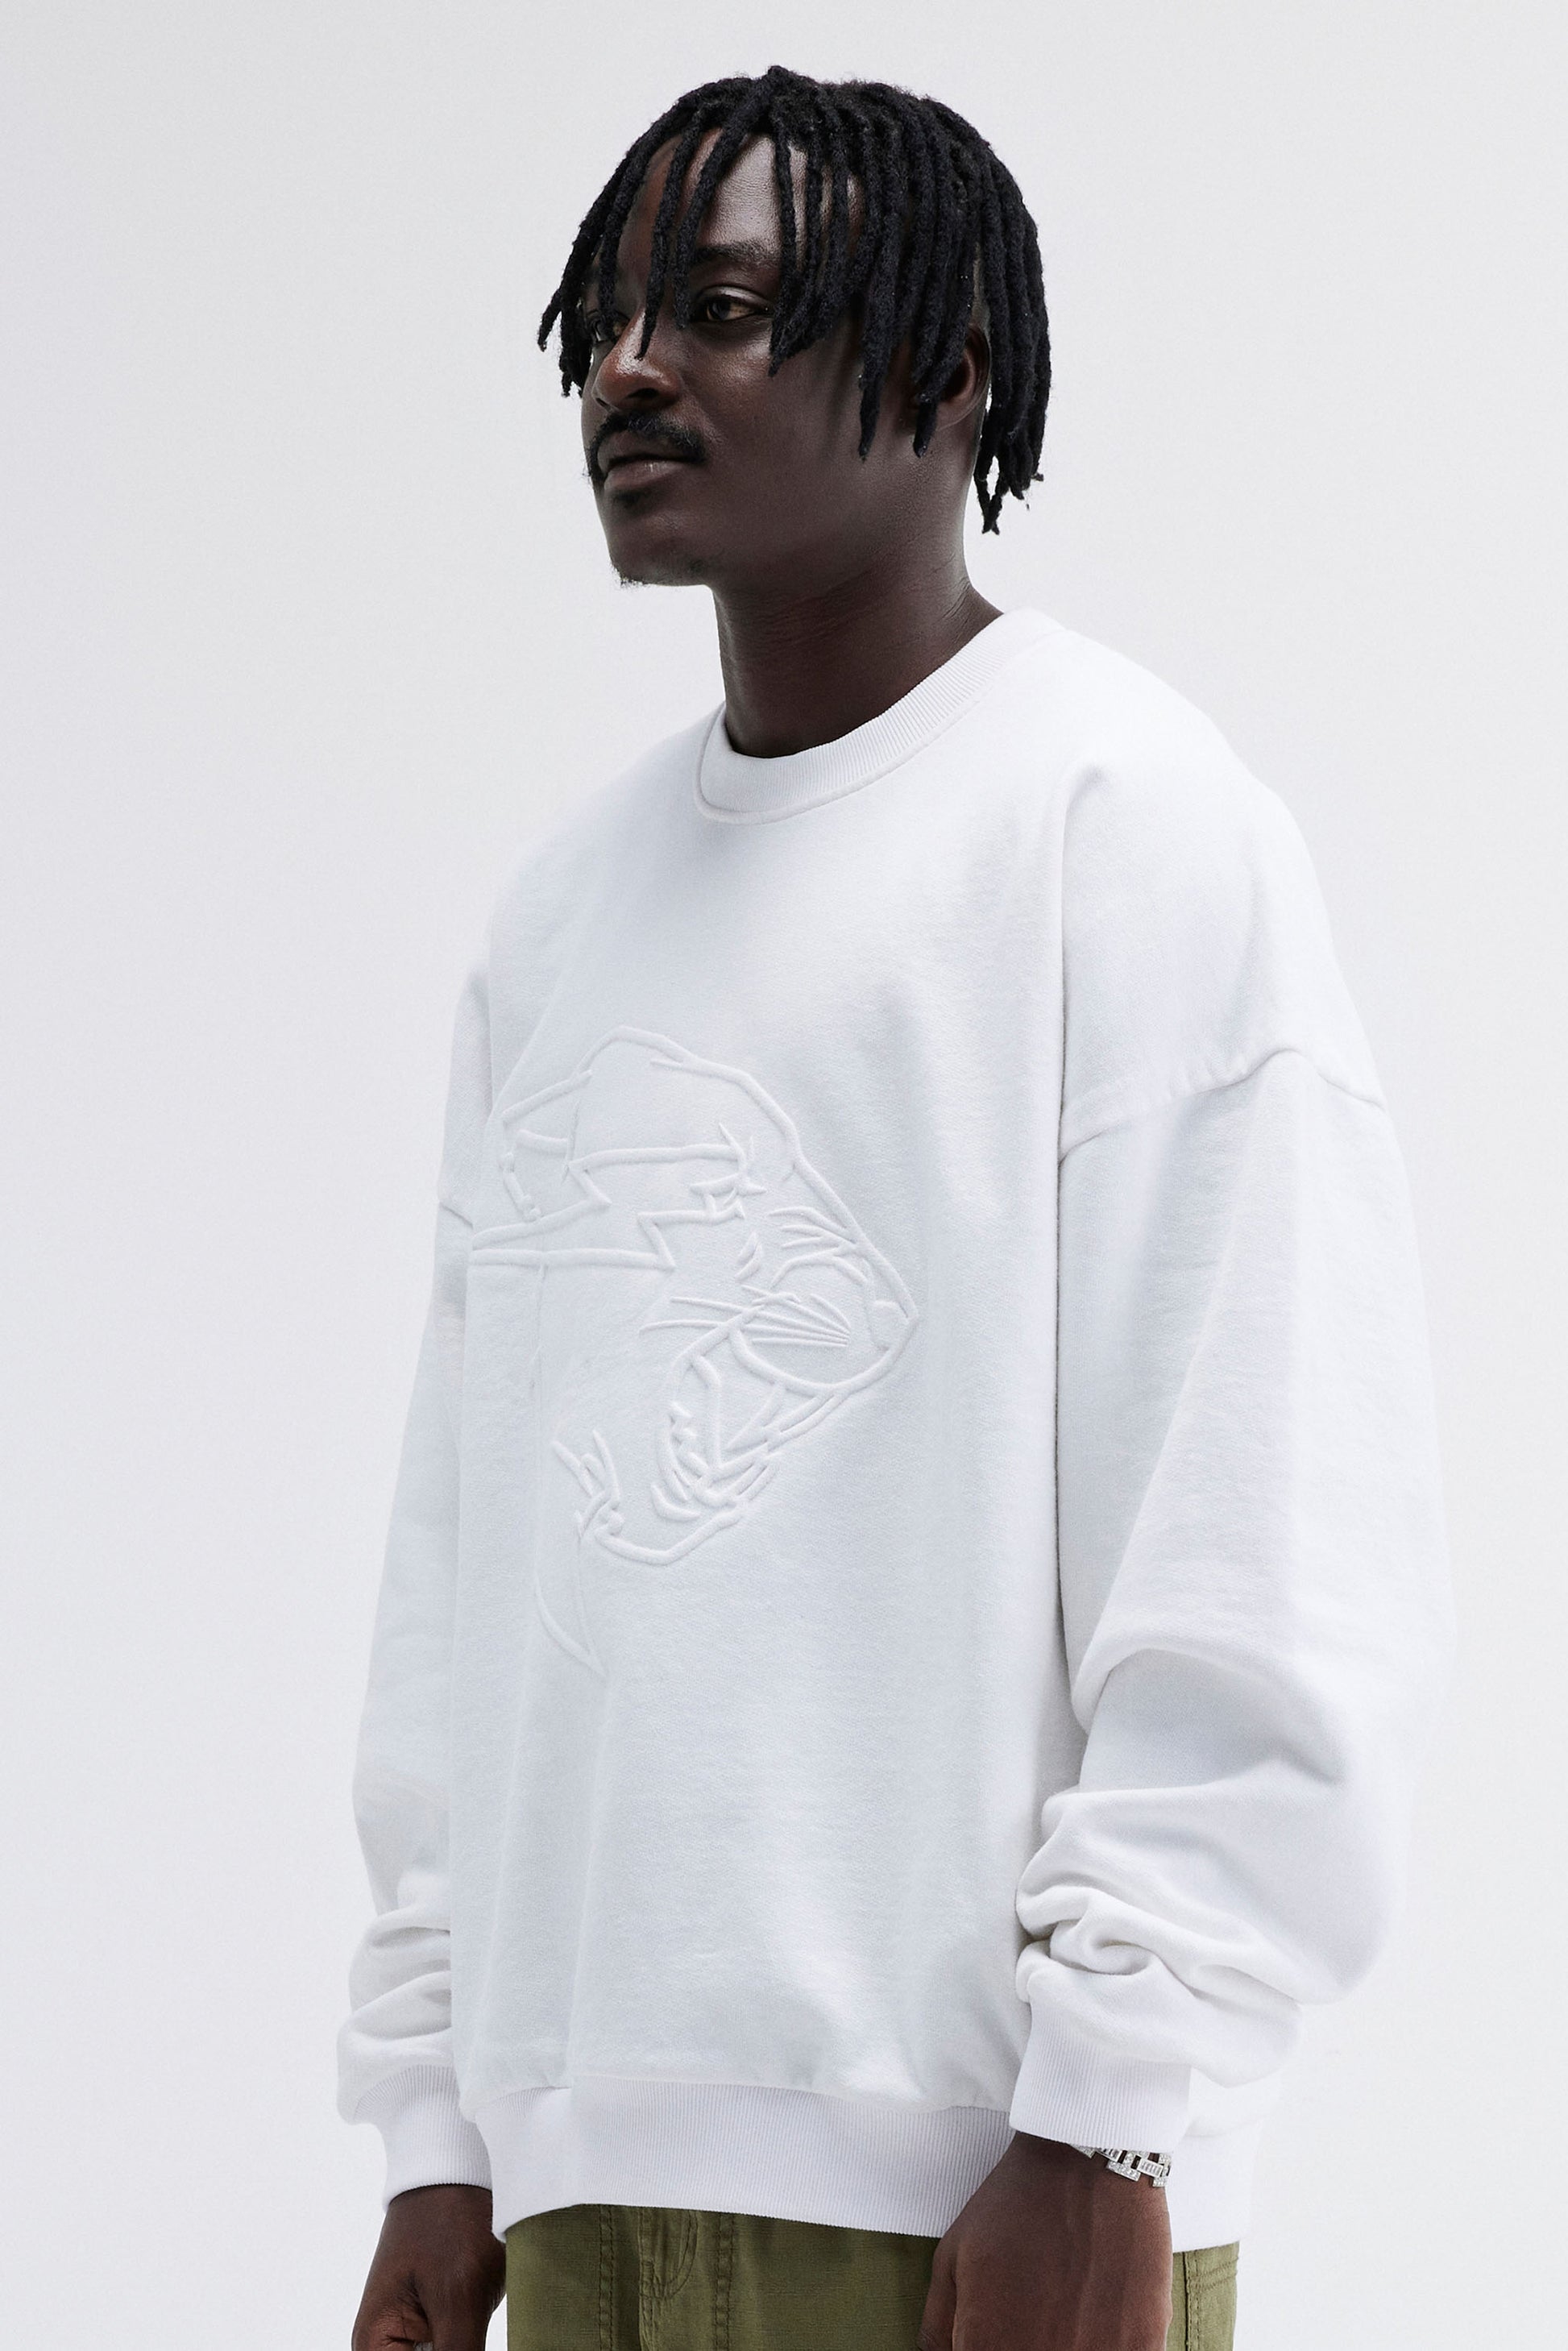 ASOS Dark Future oversized T-shirt with 3D embossed logo in gray